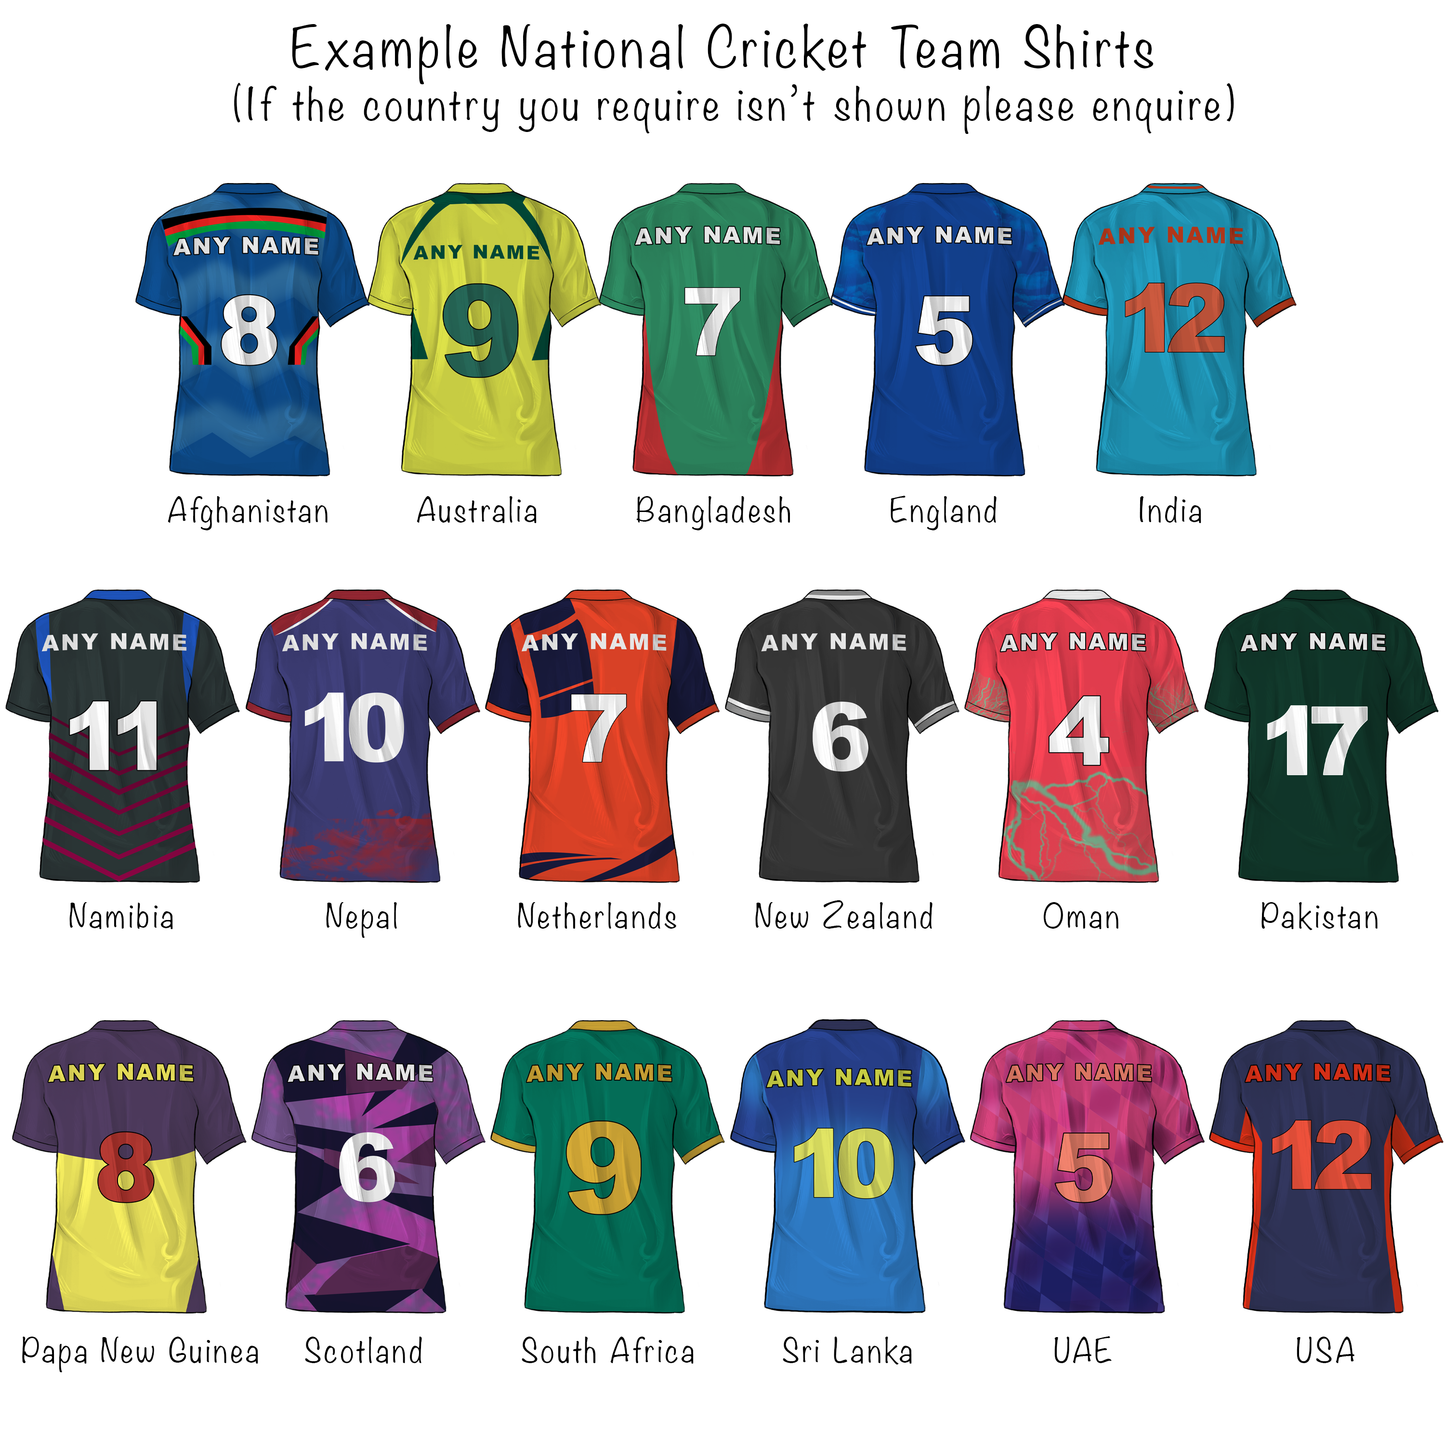 Custom Family Cricket Shirts | County & International Team Art | Ideal Father's Day or Birthday Gift